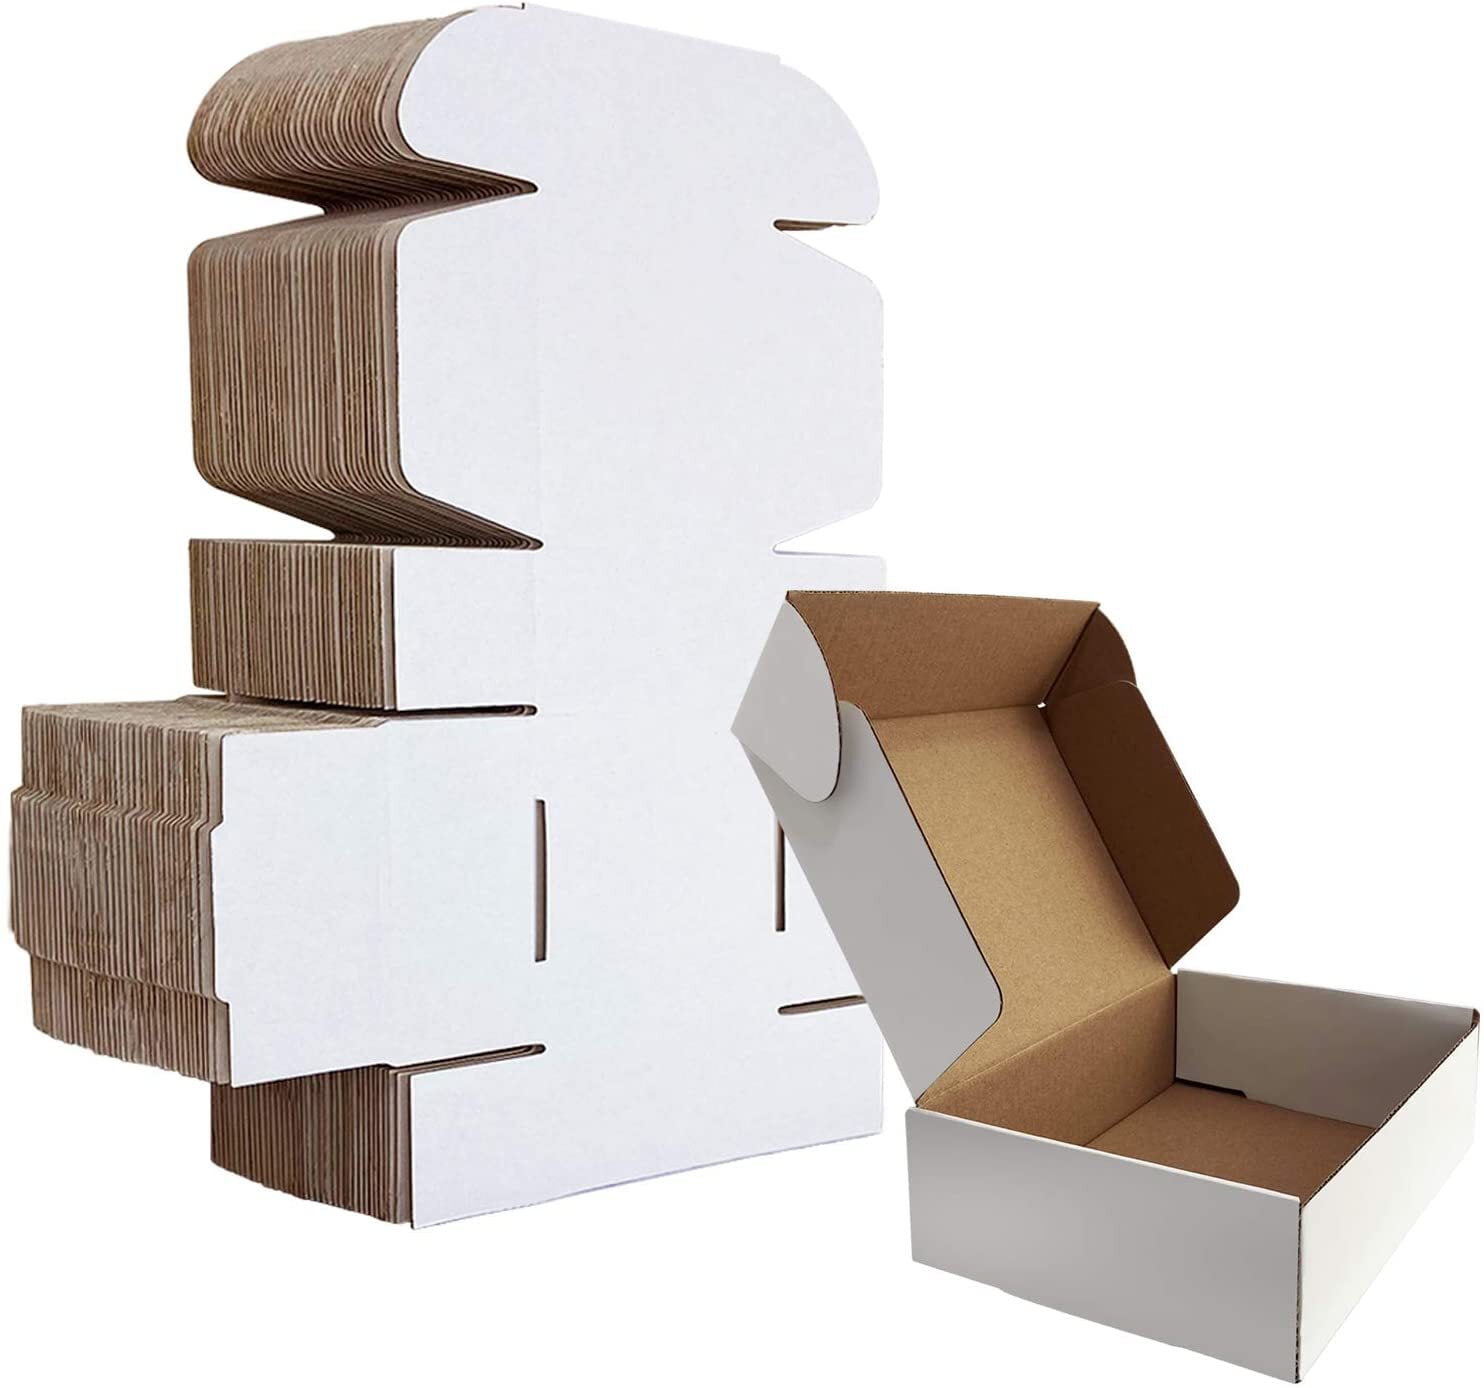 100 7x5x2 White Cardboard Paper Boxes Mailing Packing Shipping Box Carton 